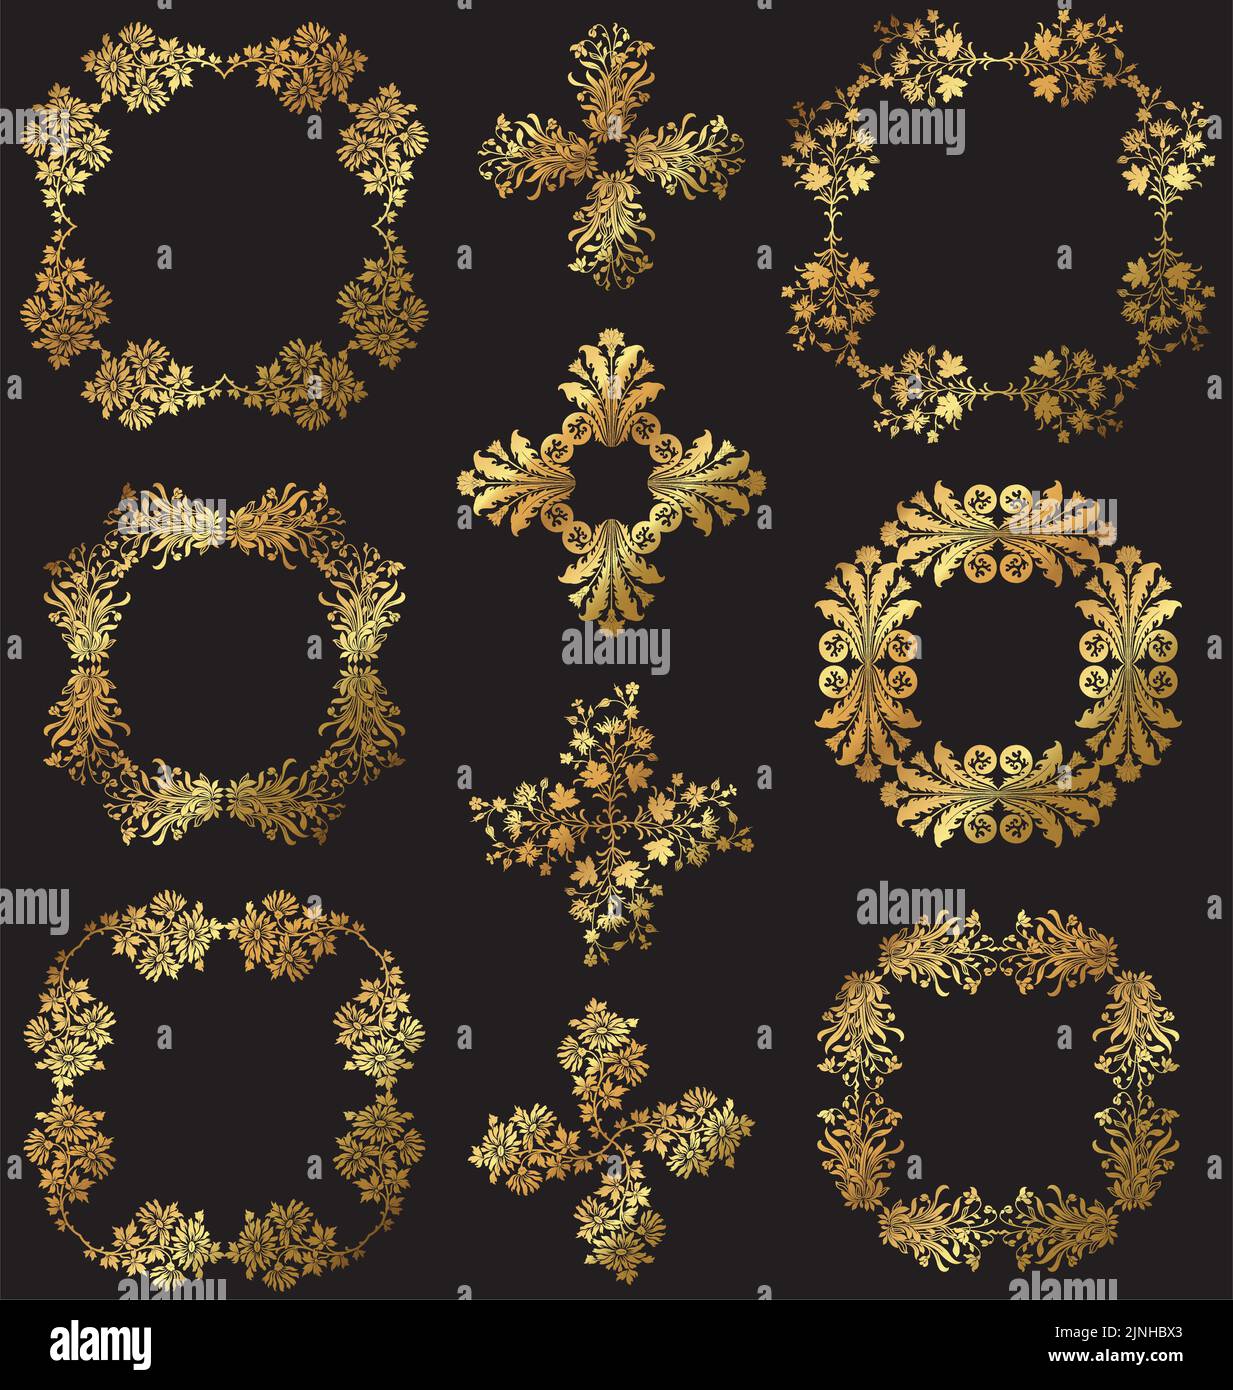 A set of vintage gold vector floral decorative borders and frames. Stock Vector